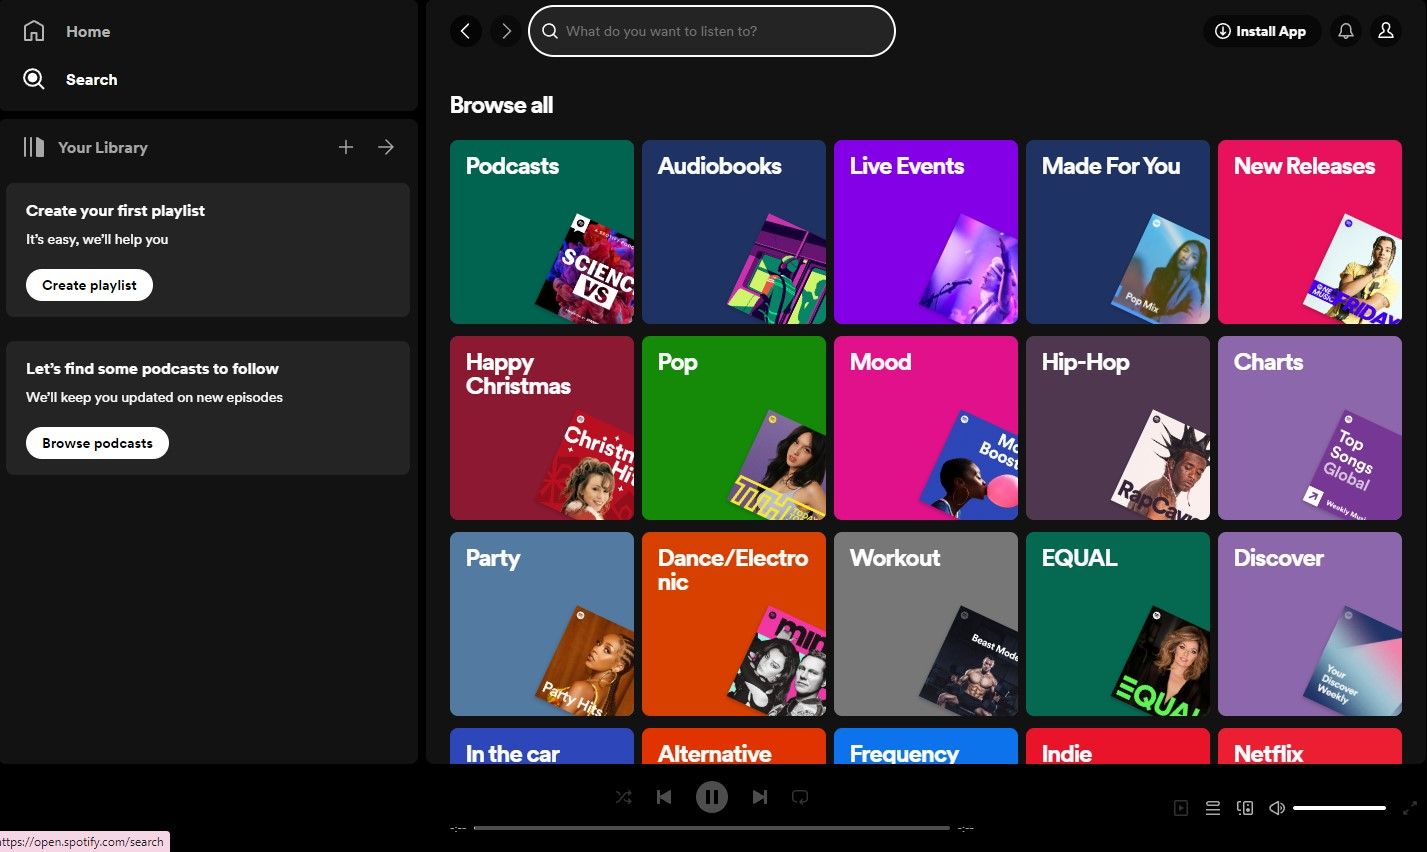 Spotify revamps its UI on desktop and web clients